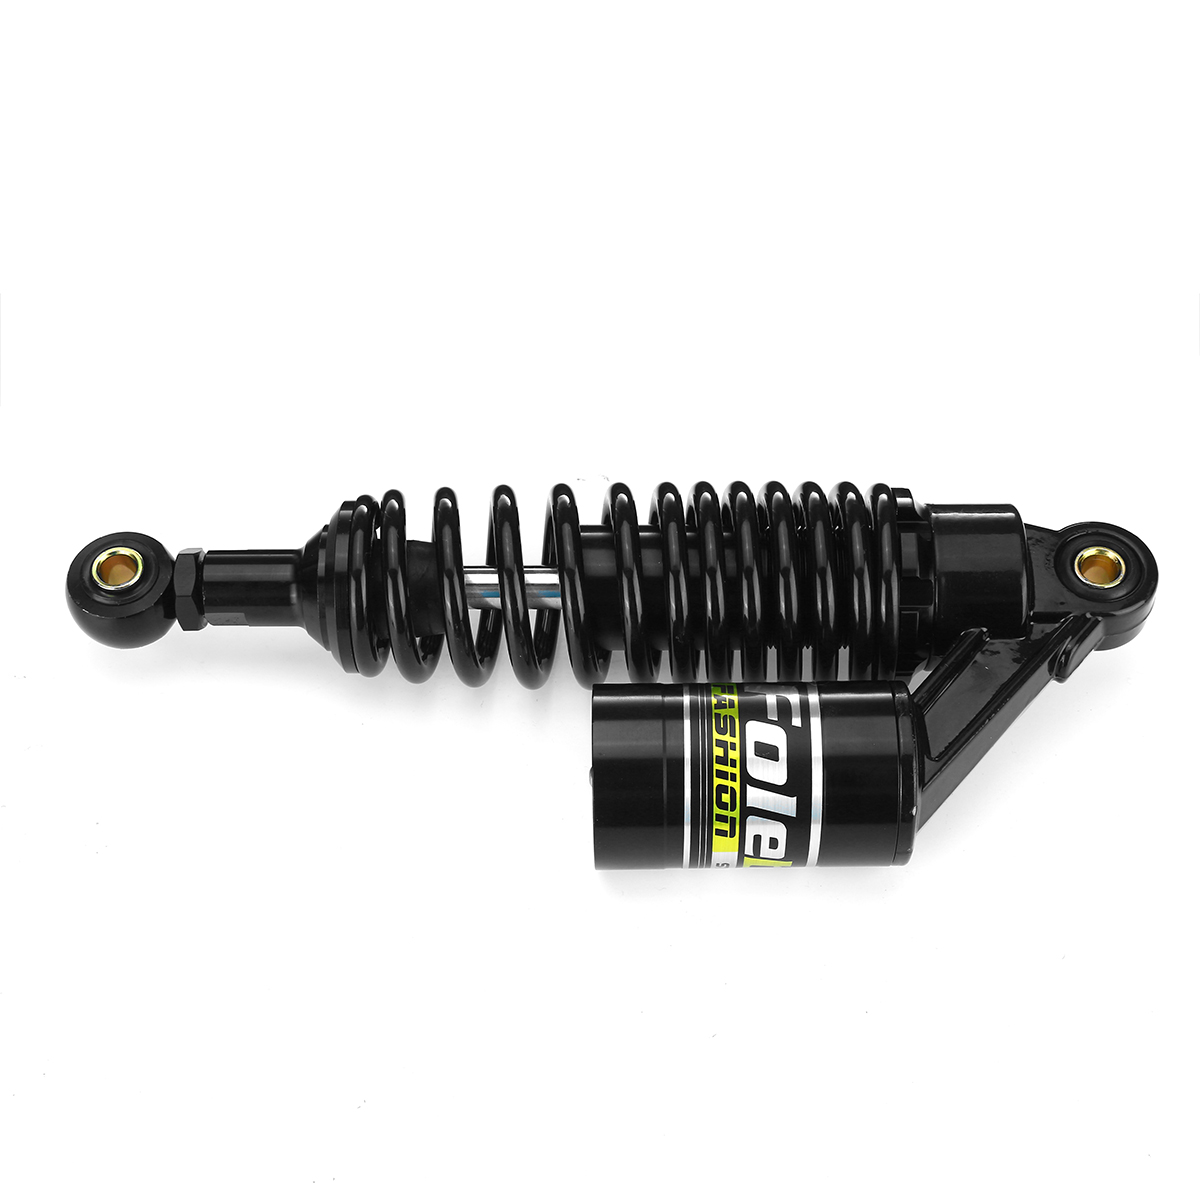 11 Inch 280Mm Motorcycle Rear Air Shock Absorber Suspension for ATV Dirt Bike - Auto GoShop